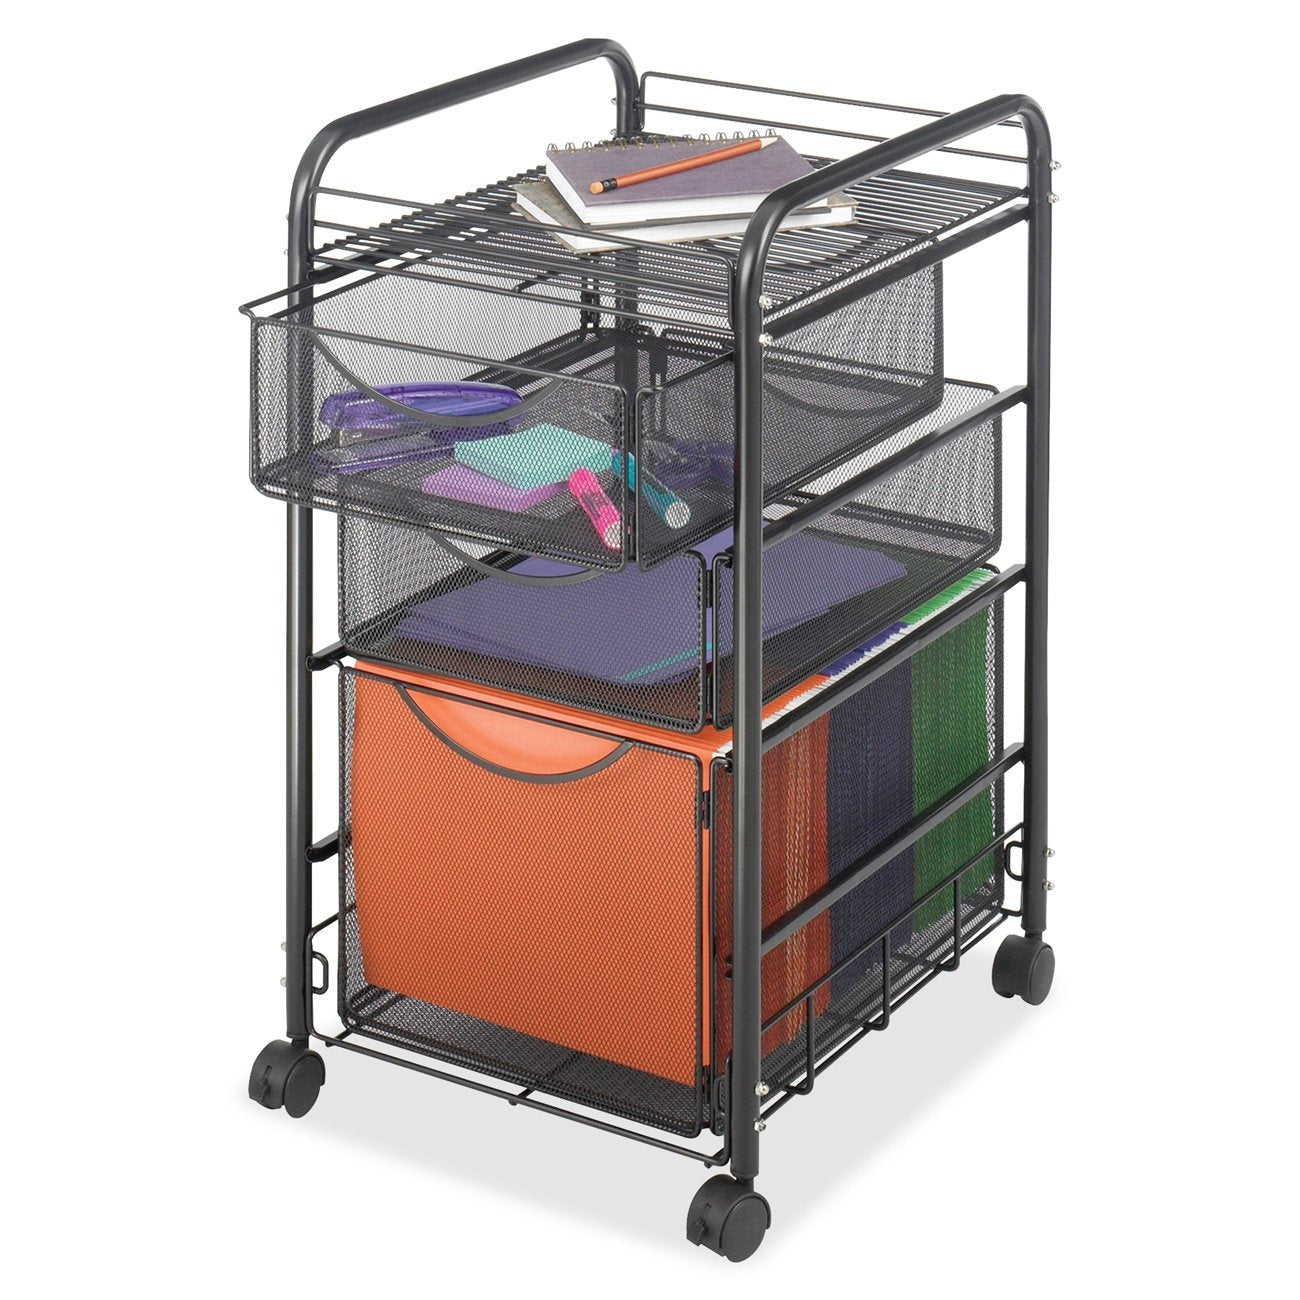 Office > Filing Cabinets - Black Metal Steel Mesh Mobile Filing Cabinet Cart With 2 Drawers And Wheels